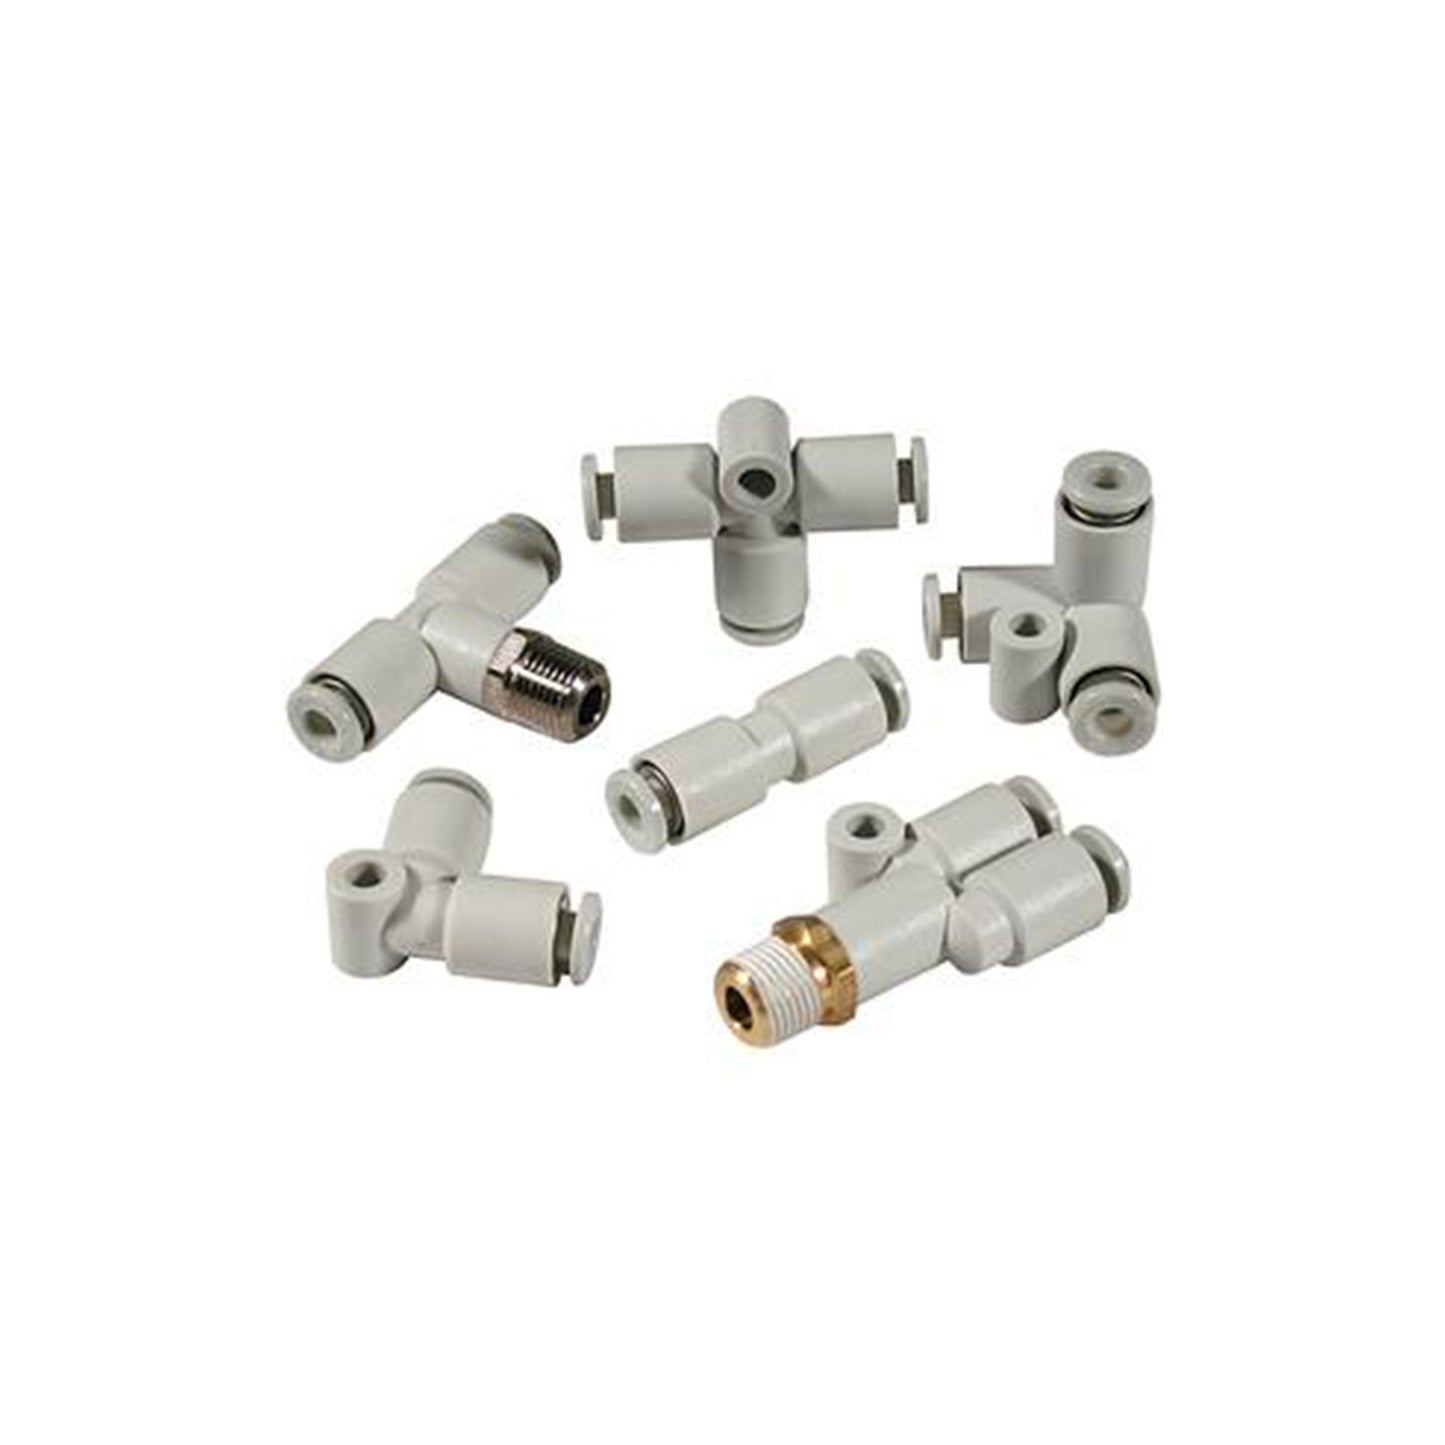 SMC KQ2H05-U02 | Unifit Male Connector Fitting